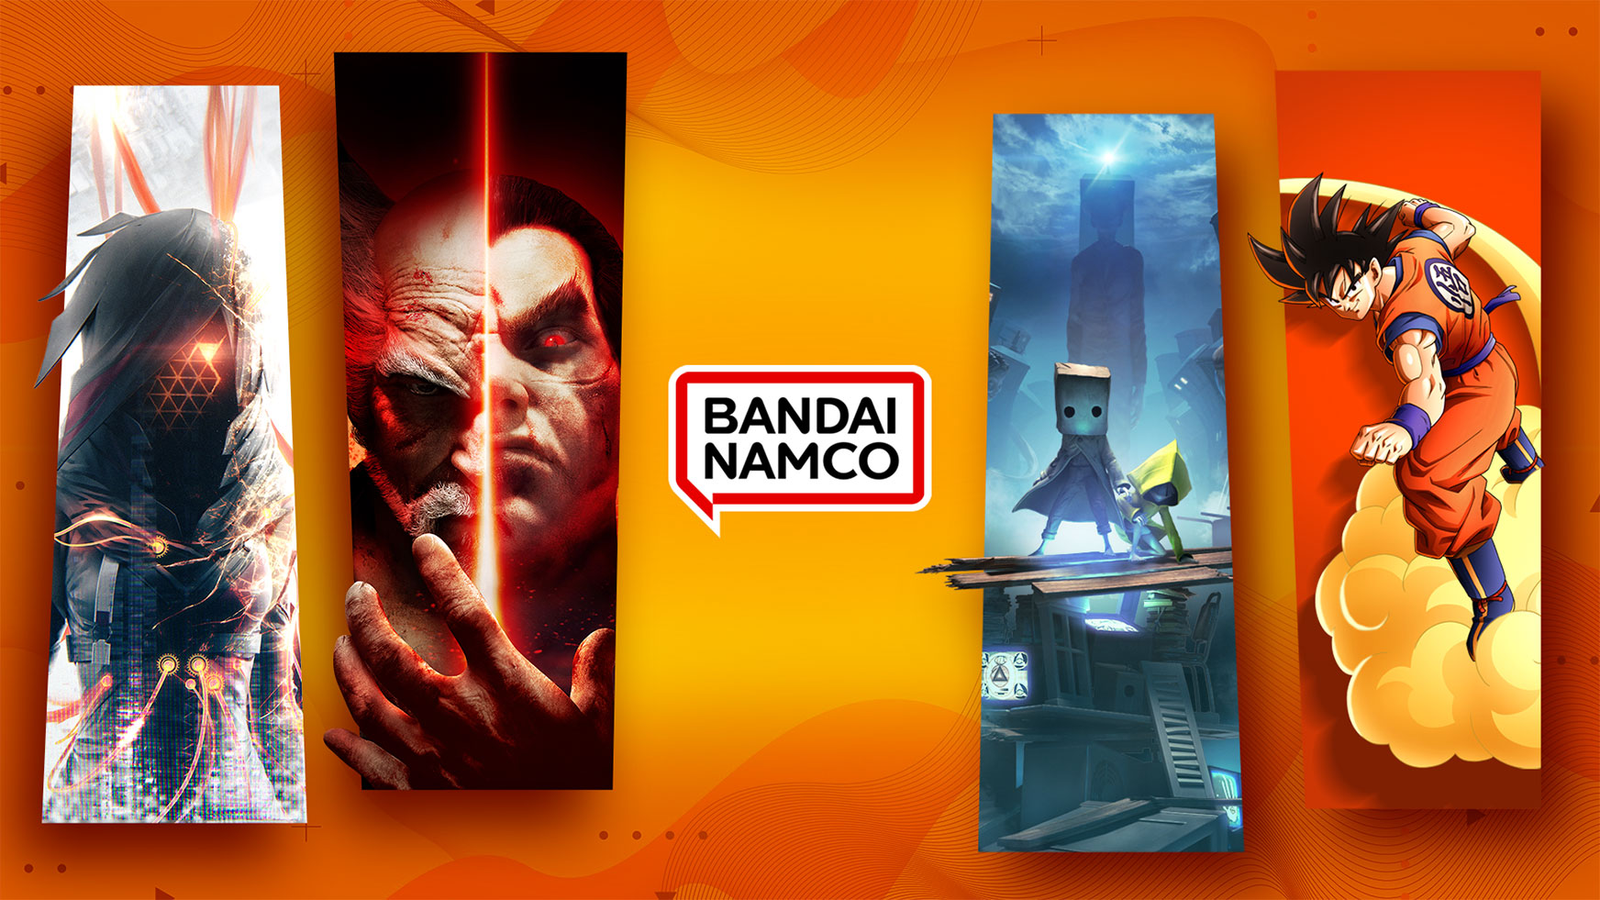 Bandai Namco's game sales up 55% year-on-year during Q1 FY2023